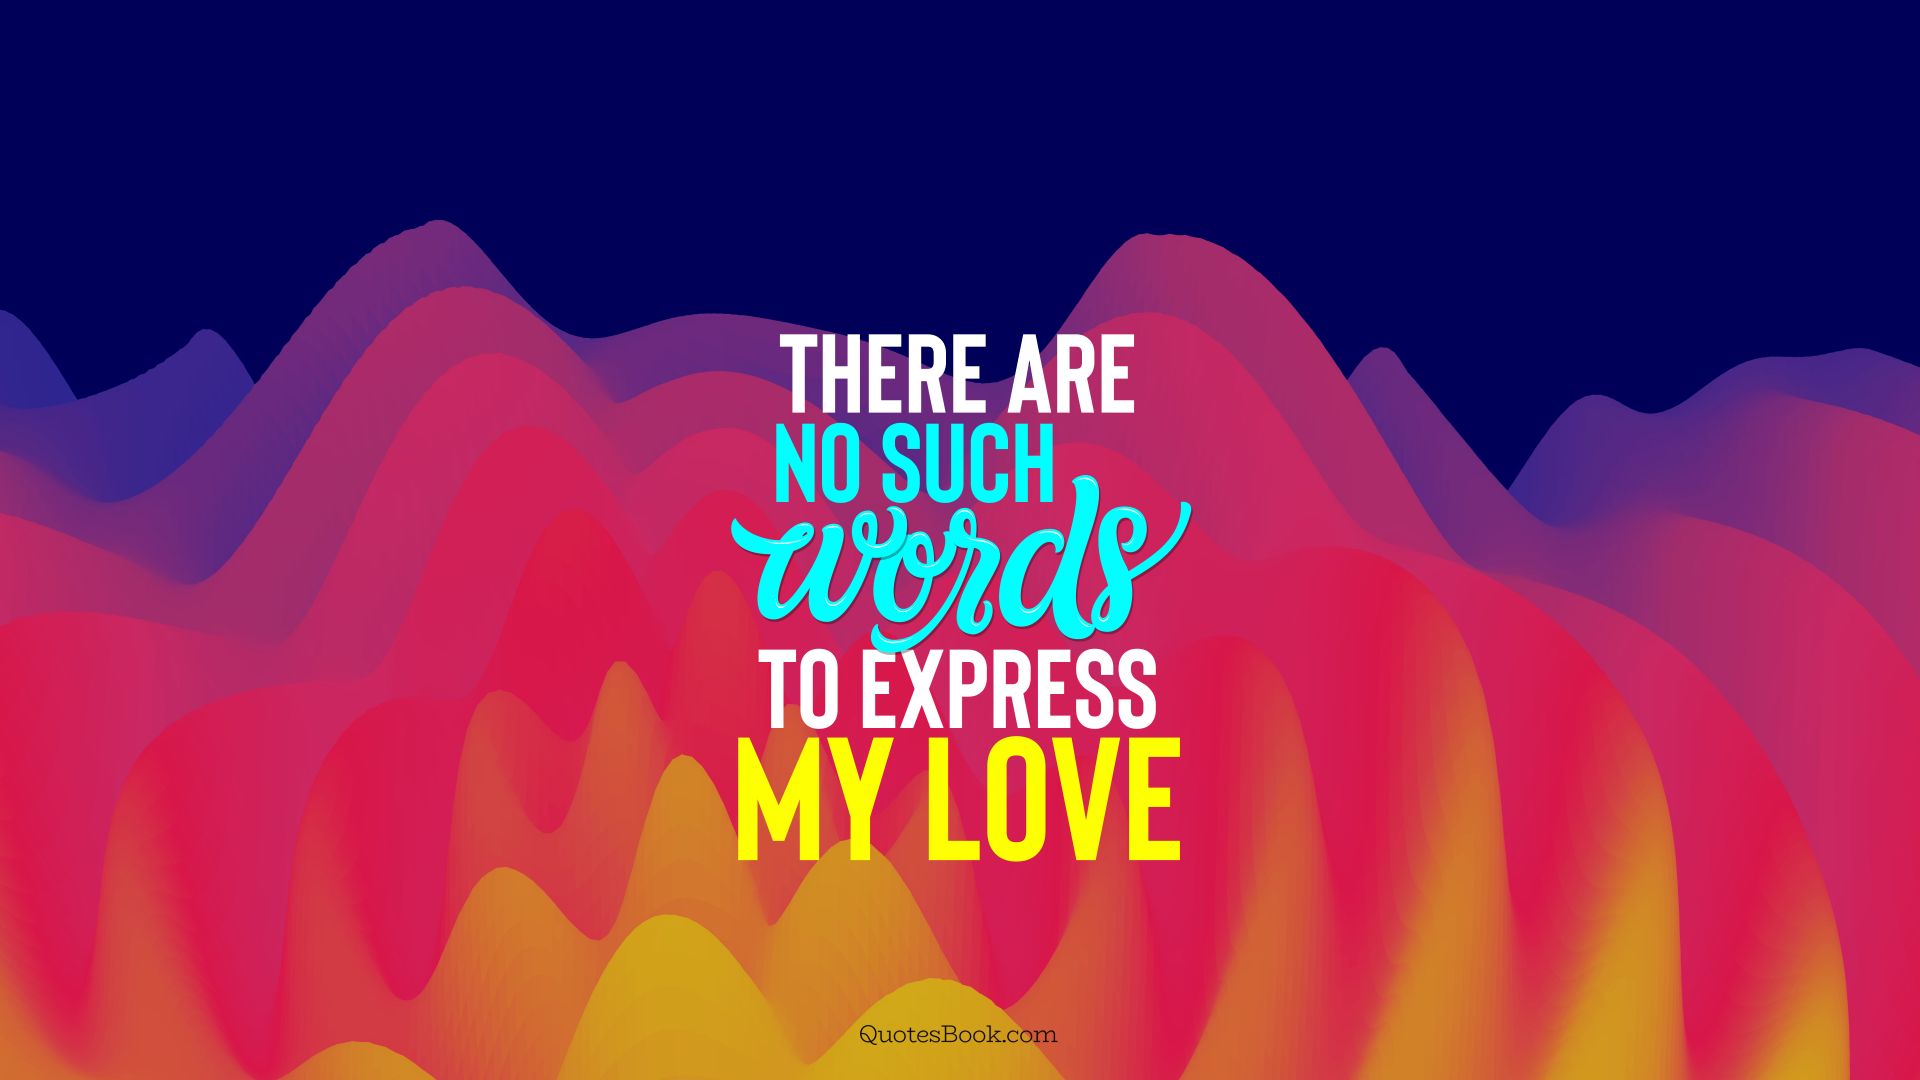 There are no such words to express my love. - Quote by QuotesBook